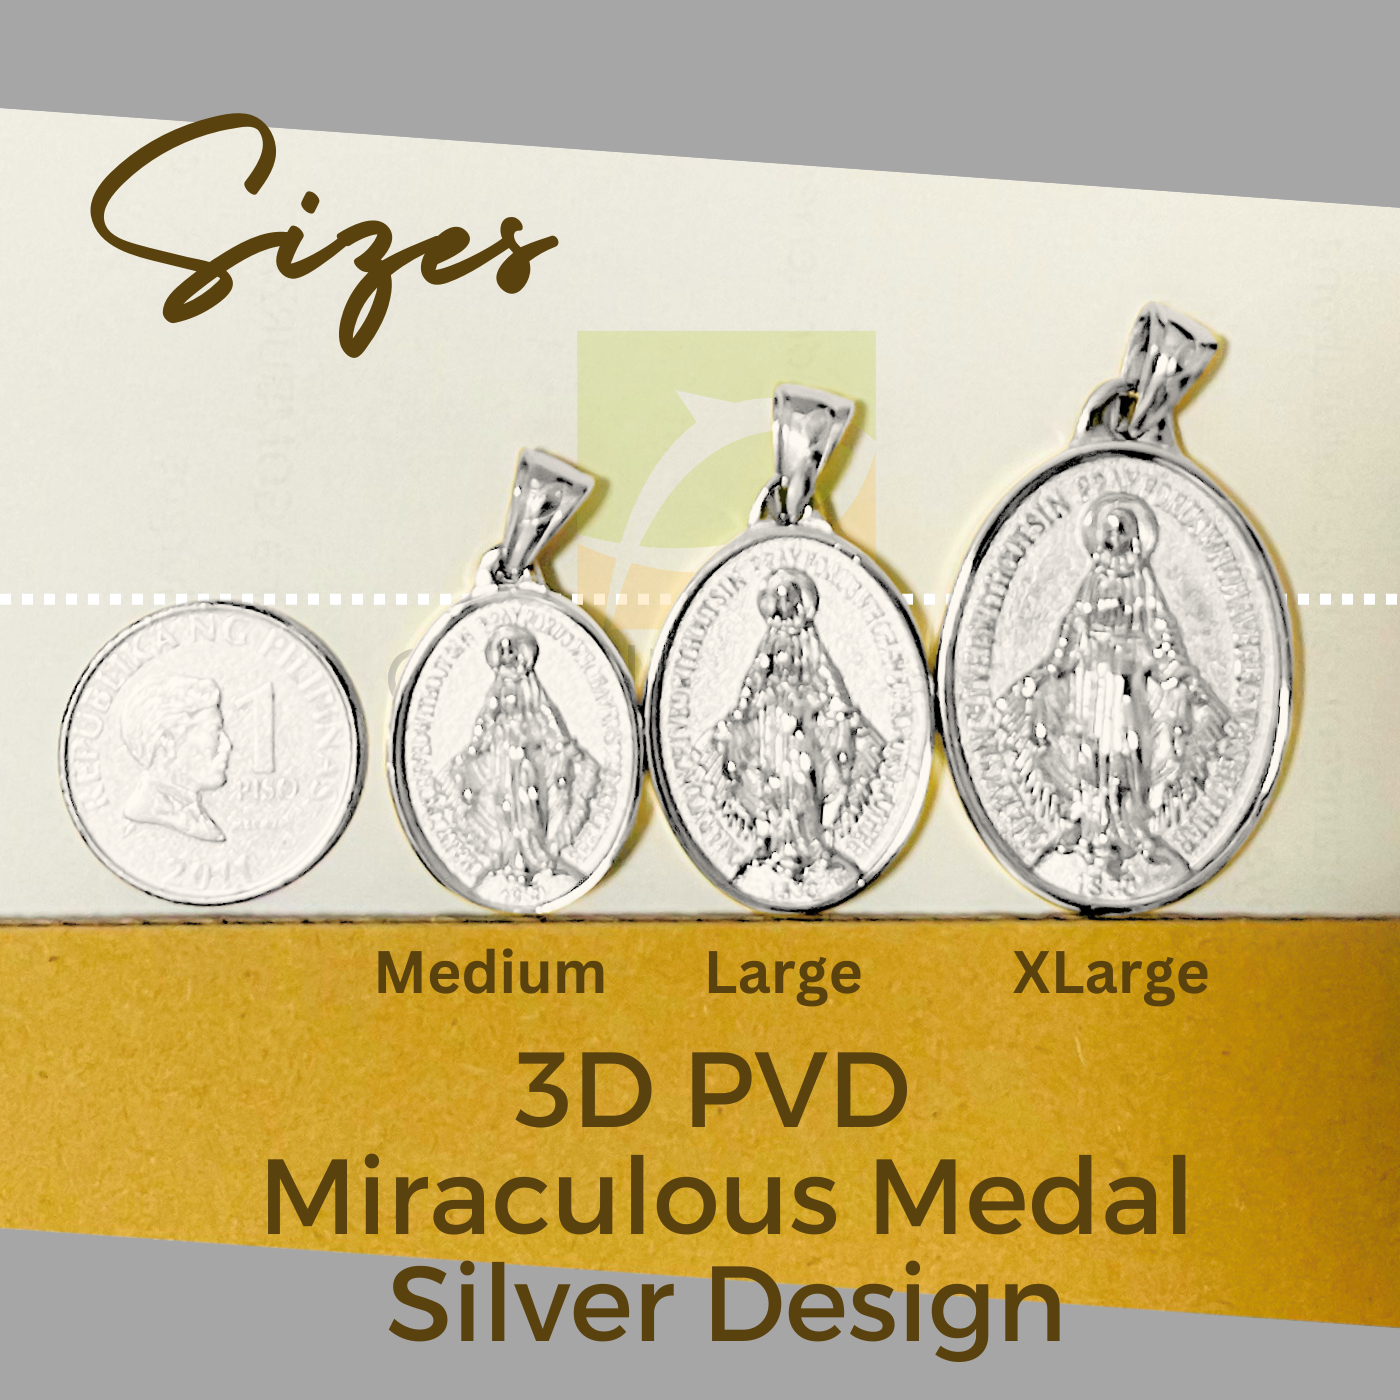 How I Found Abounding Graces in the Miraculous Medal